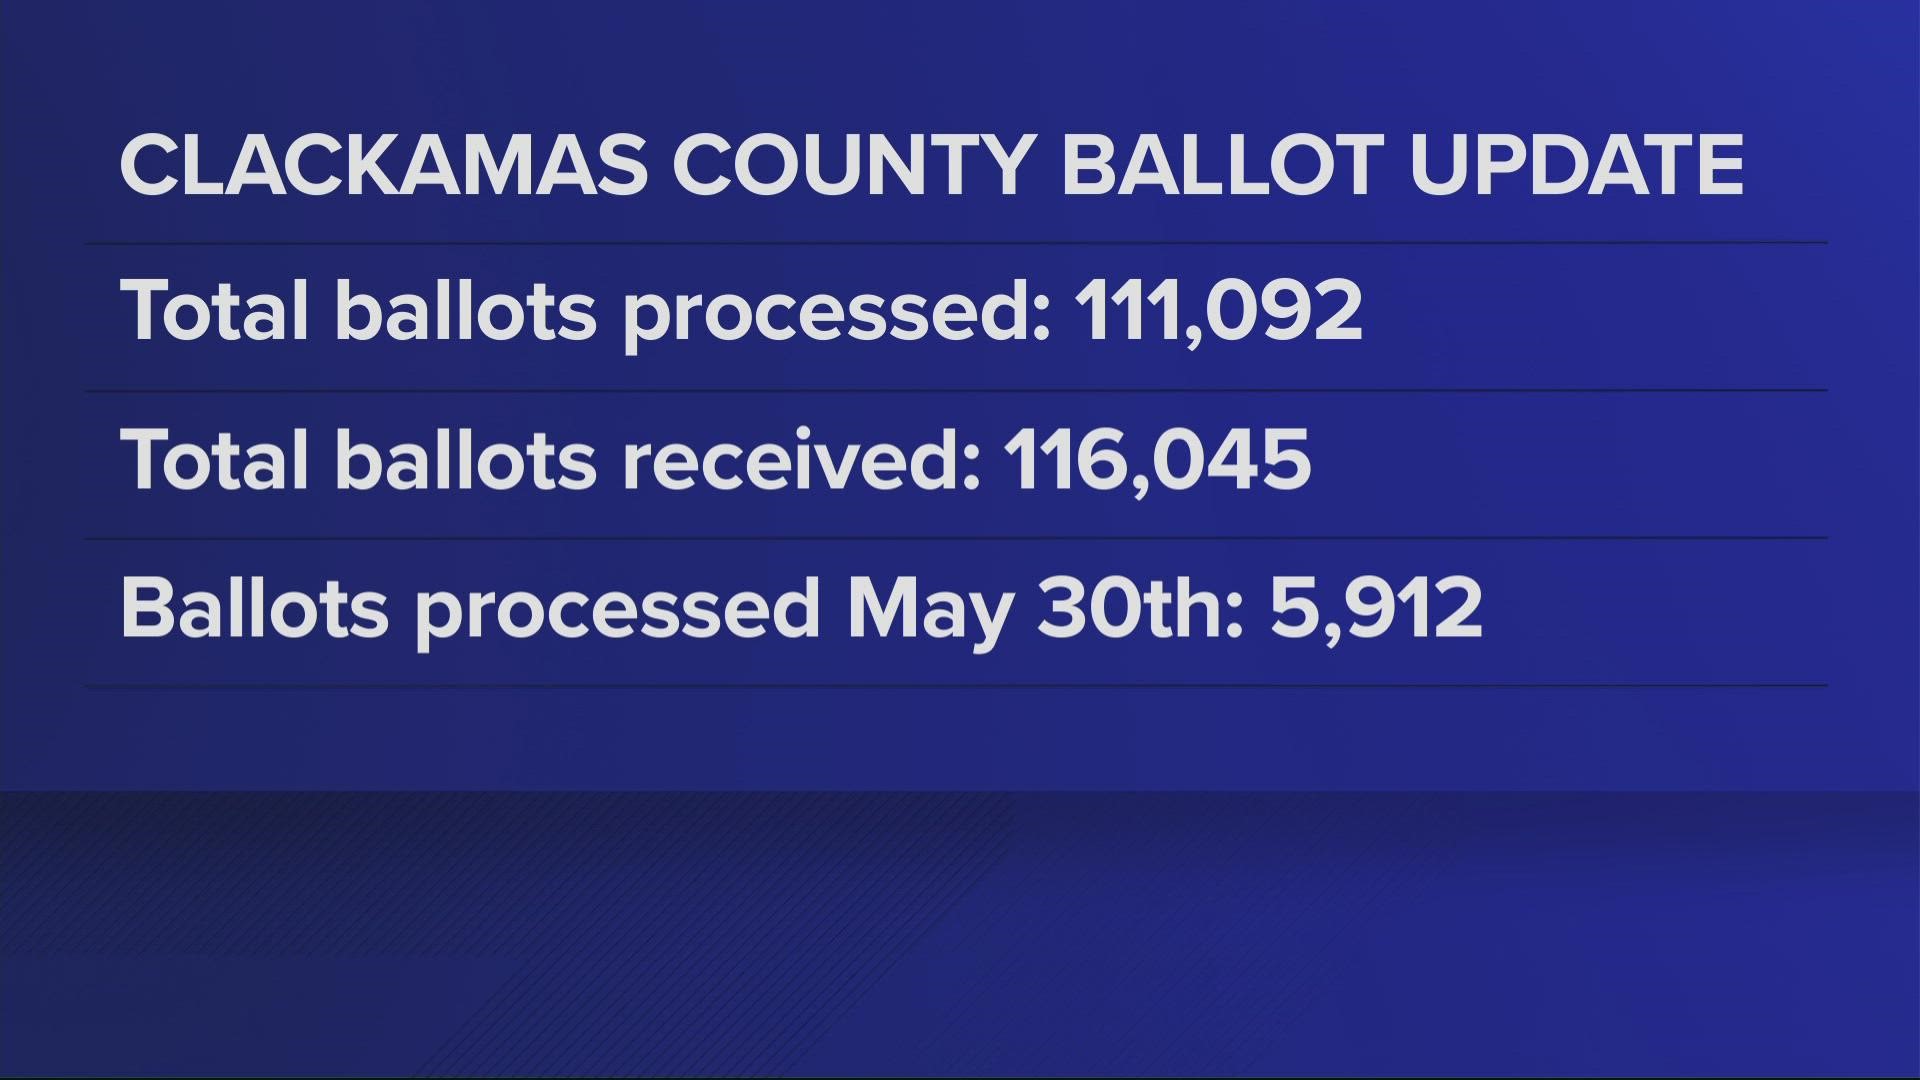 The primary election ballot count has dragged on for two weeks due to a printing error that made most ballots unreadable by machine scanners.